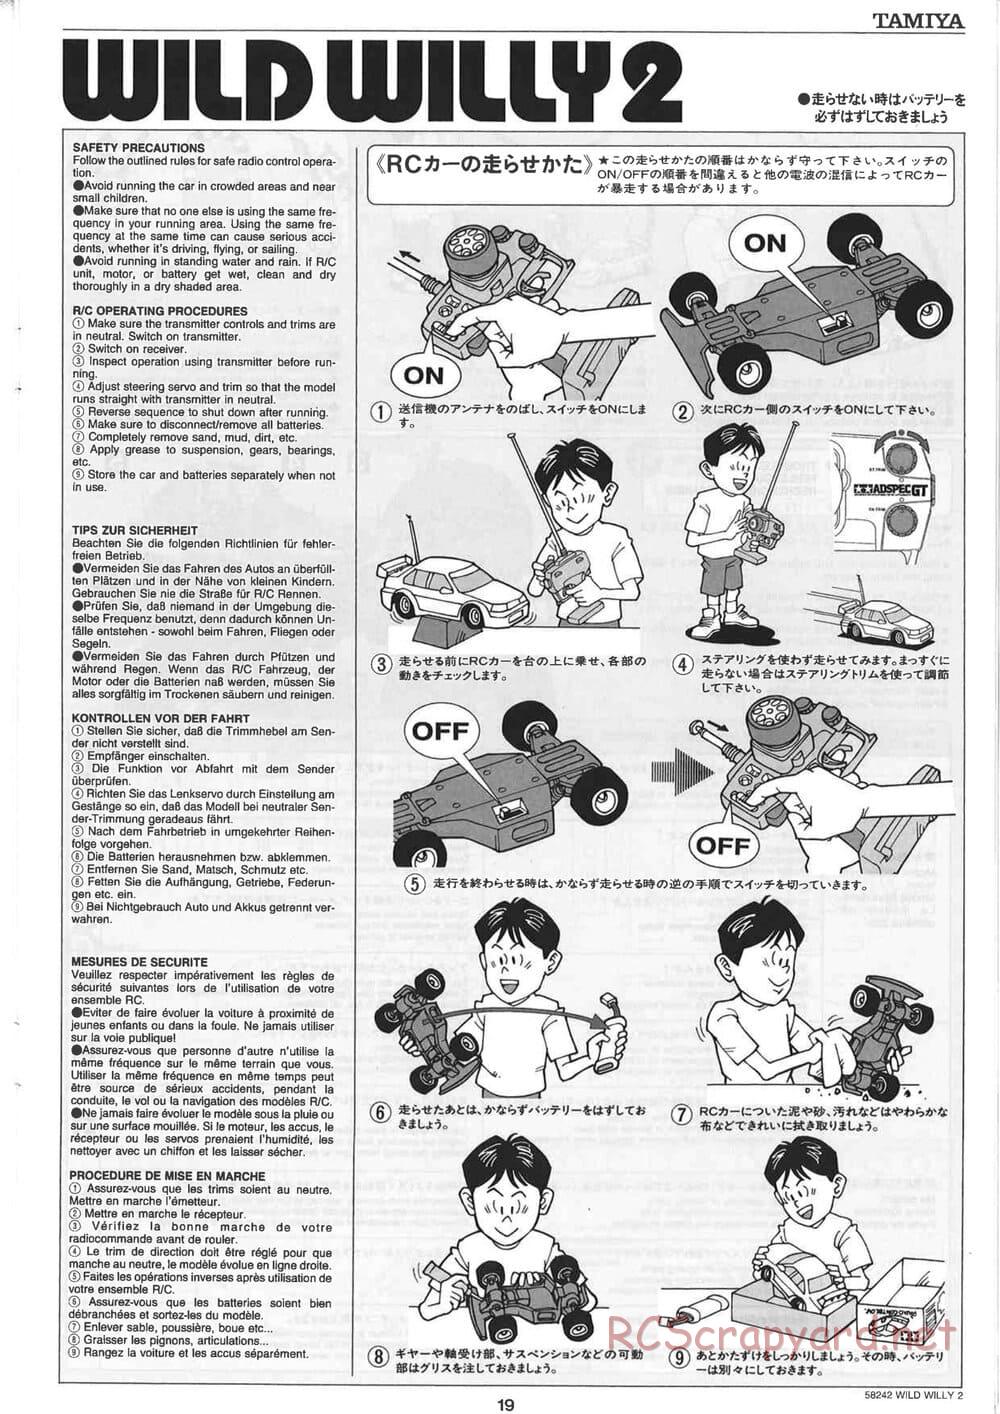 Tamiya - Wild Willy 2 - WR-02 Chassis - Manual - Page 19